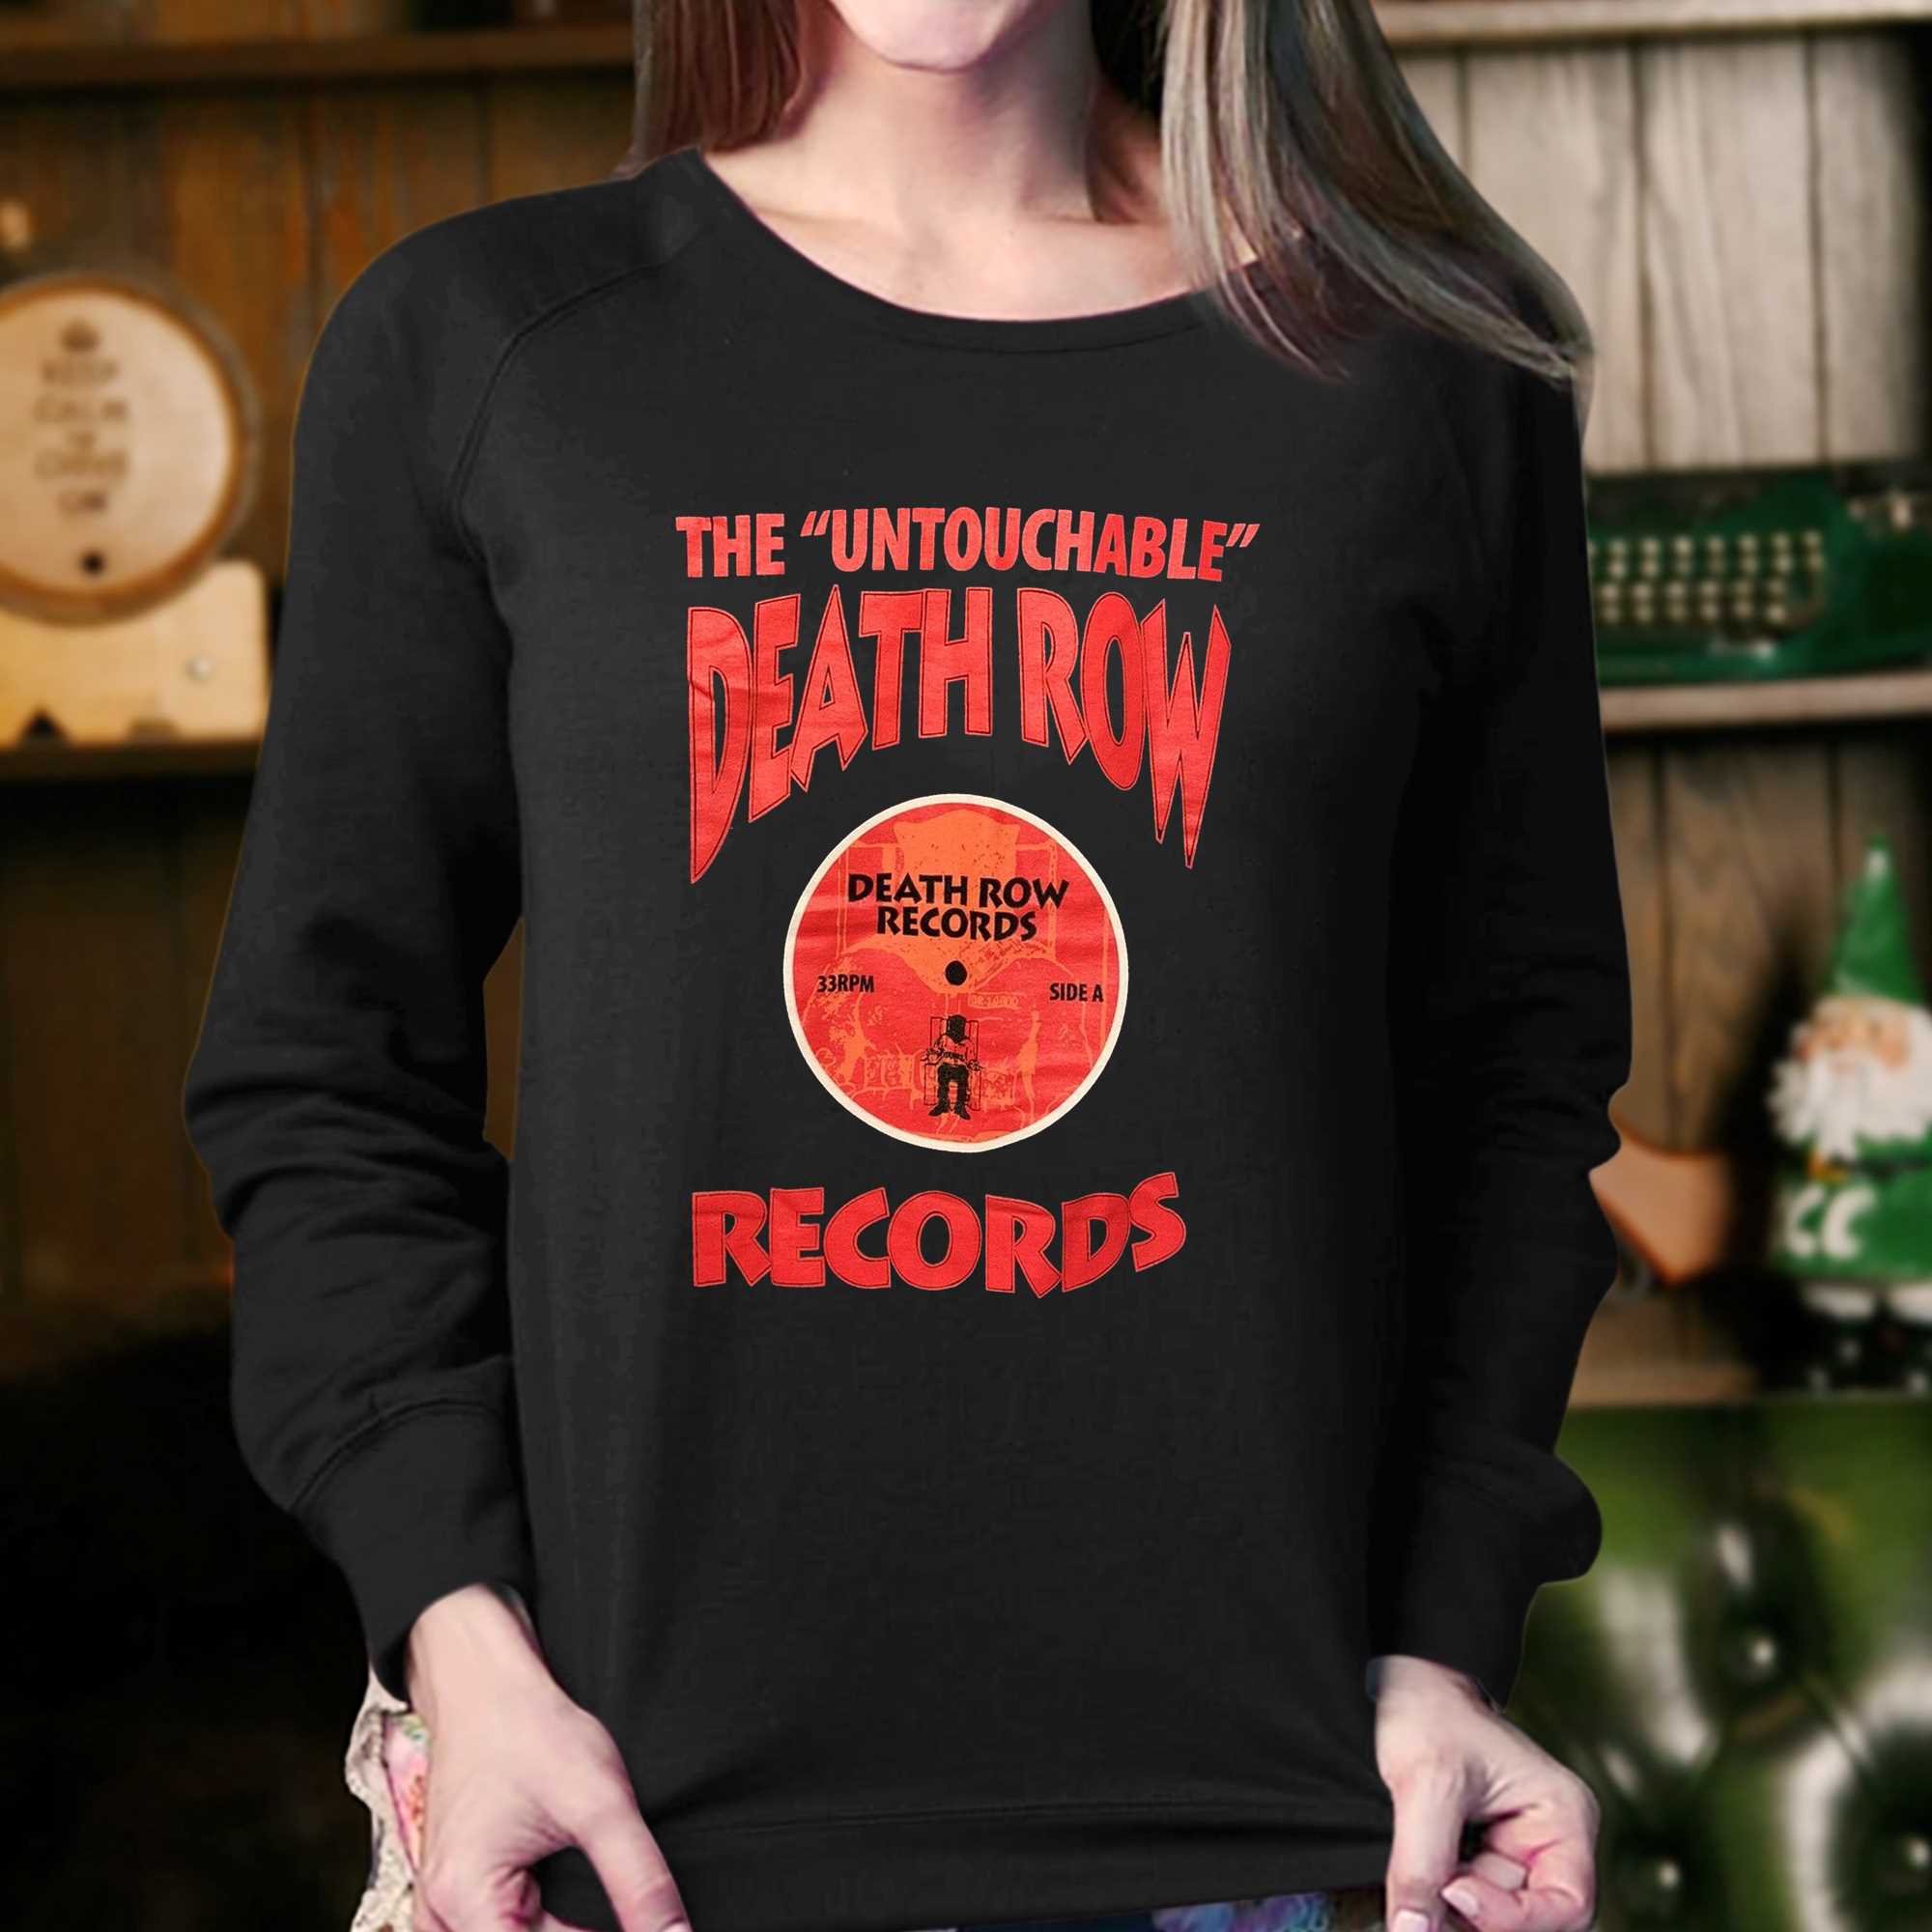 The Untouchable Death Row Records T Shirt Small Black Dr Dre Snoop Dogg